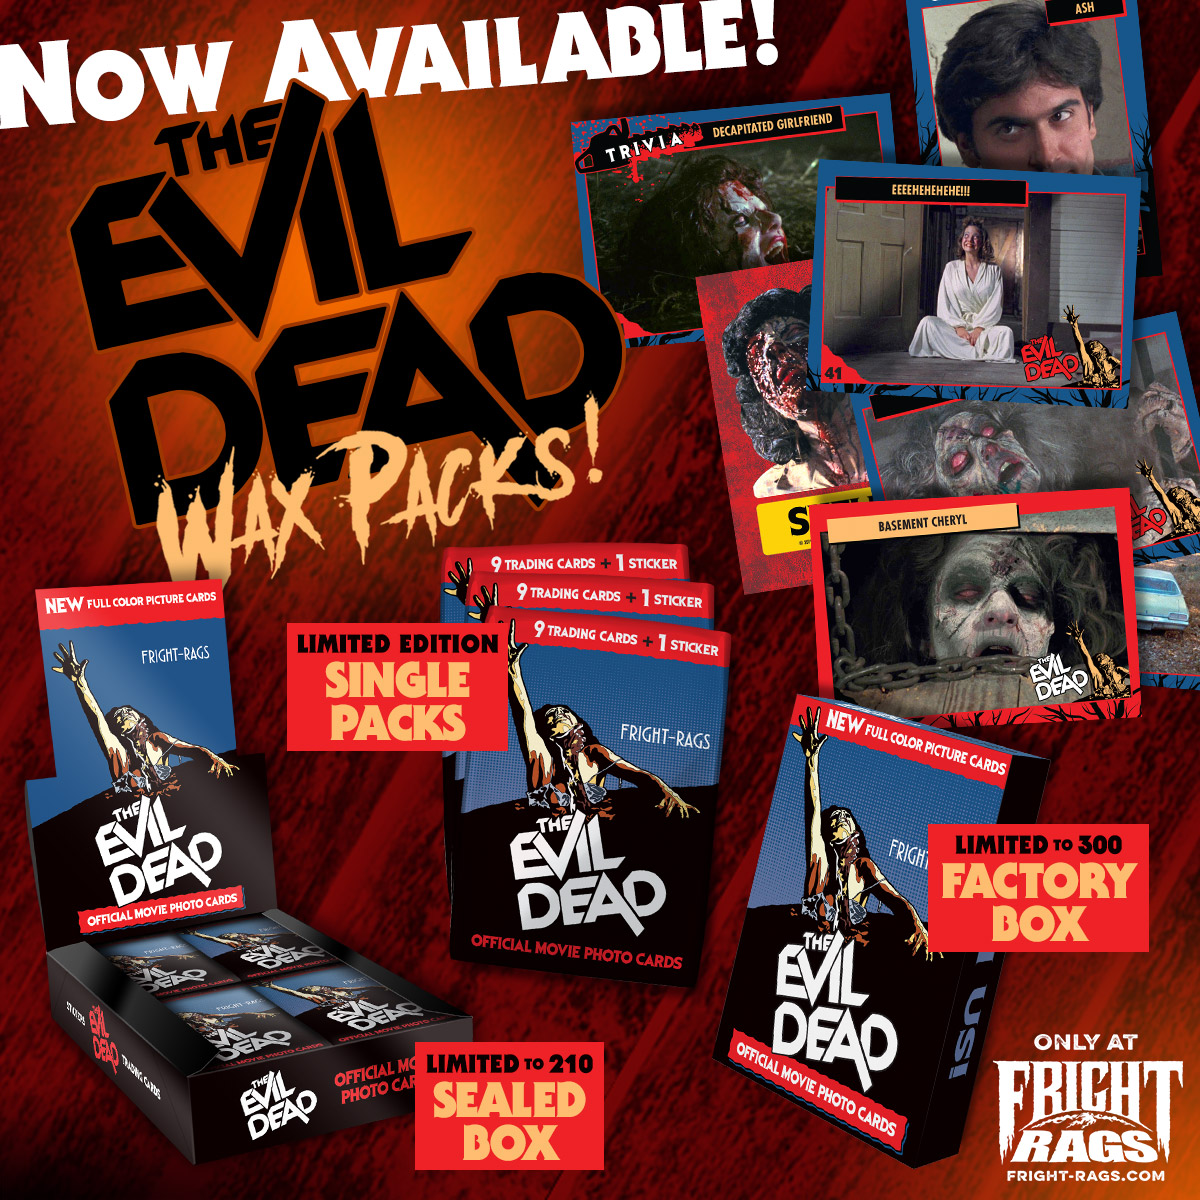 Creepshow Box Set & Evil Dead Trading Cards from Fright-Rags